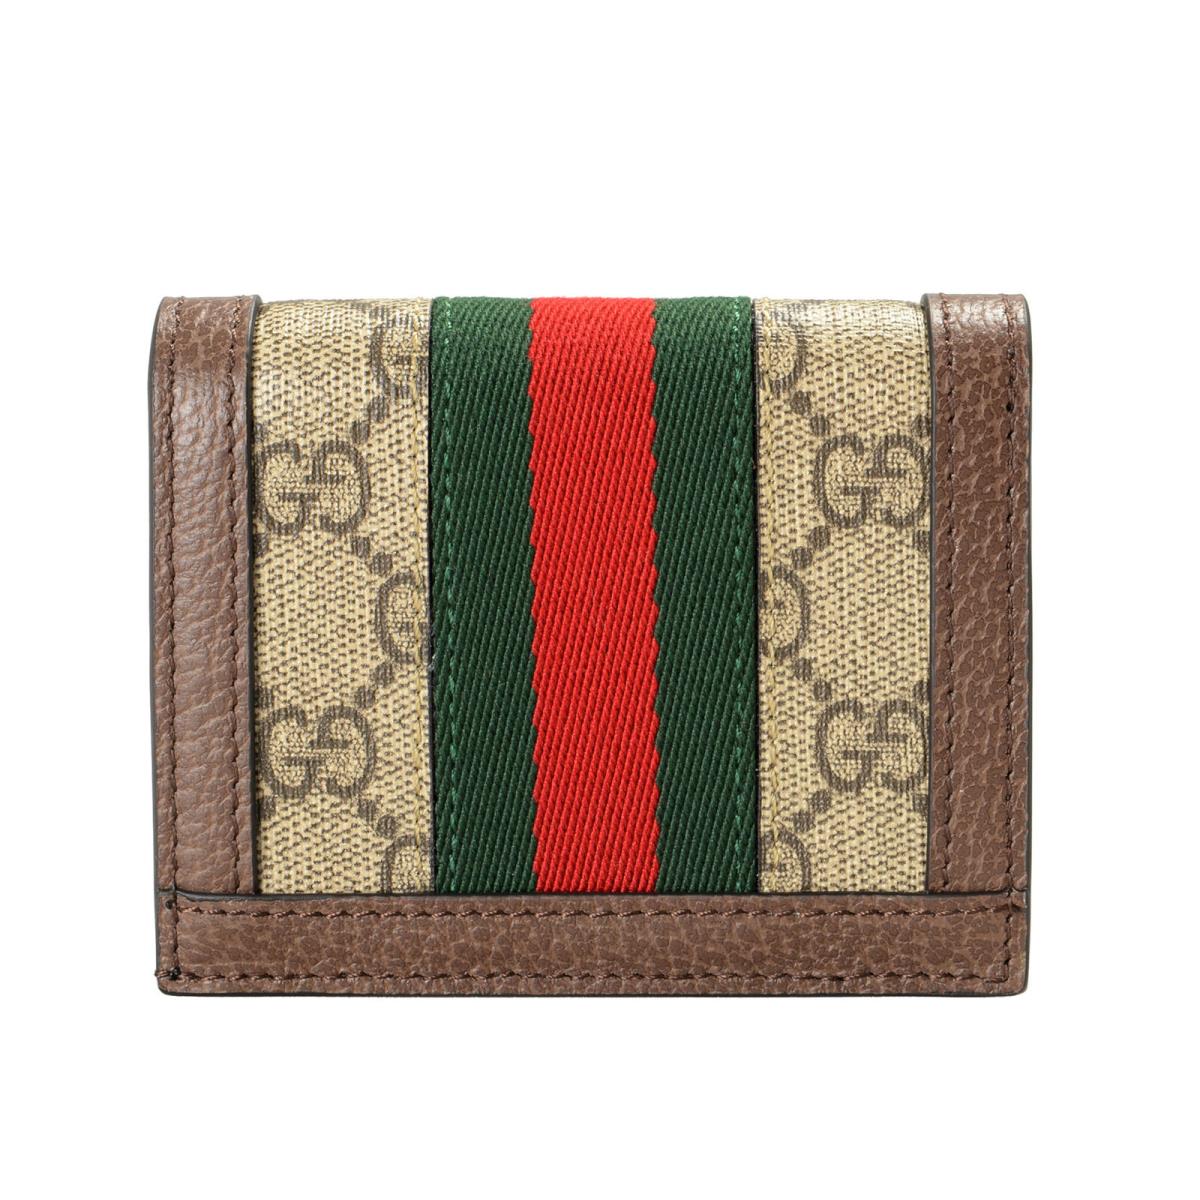 Gucci Women`s Ophidia GG Leather Trimmed Card Case Wallet